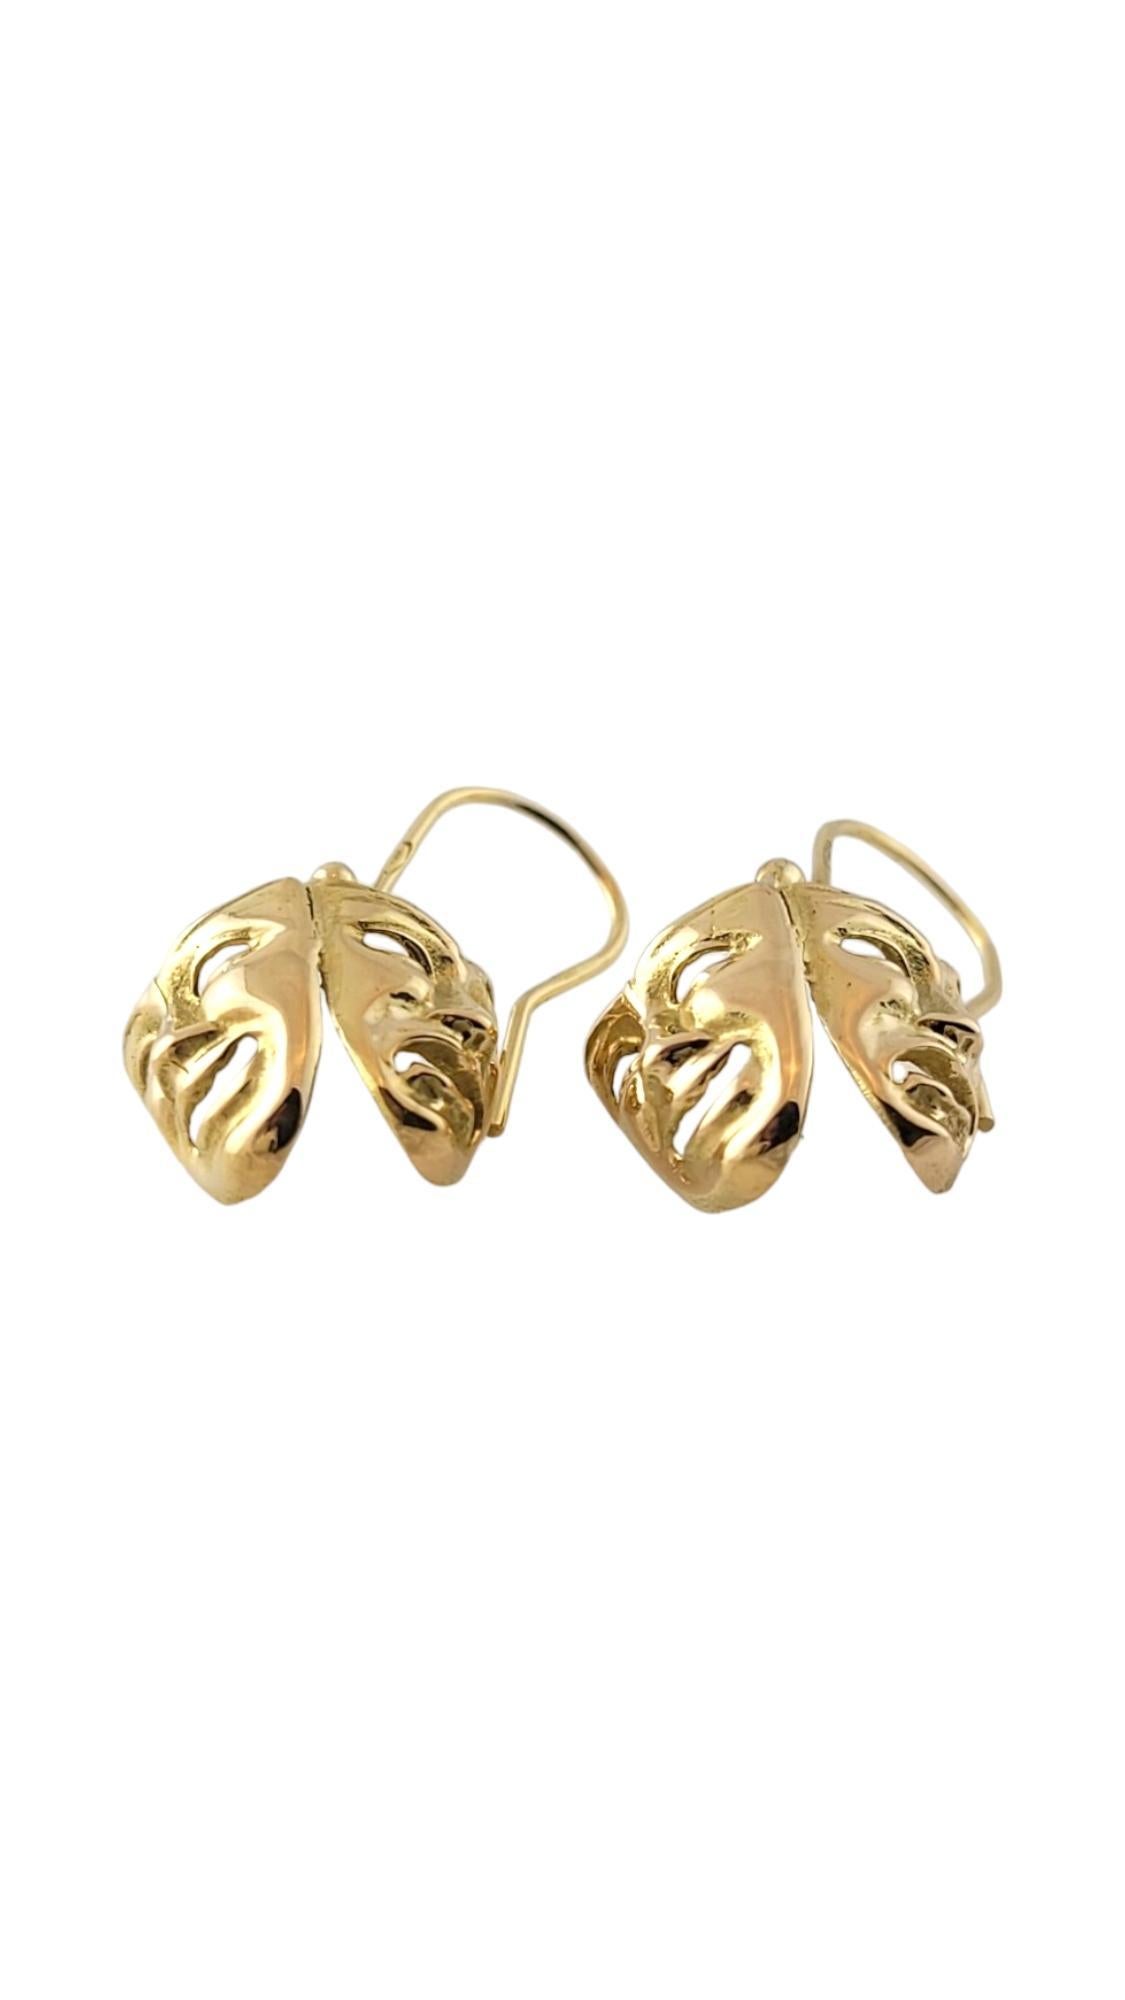 18K Yellow Gold Comedy Tragedy Theater Mask Earrings #16867 In Good Condition For Sale In Washington Depot, CT